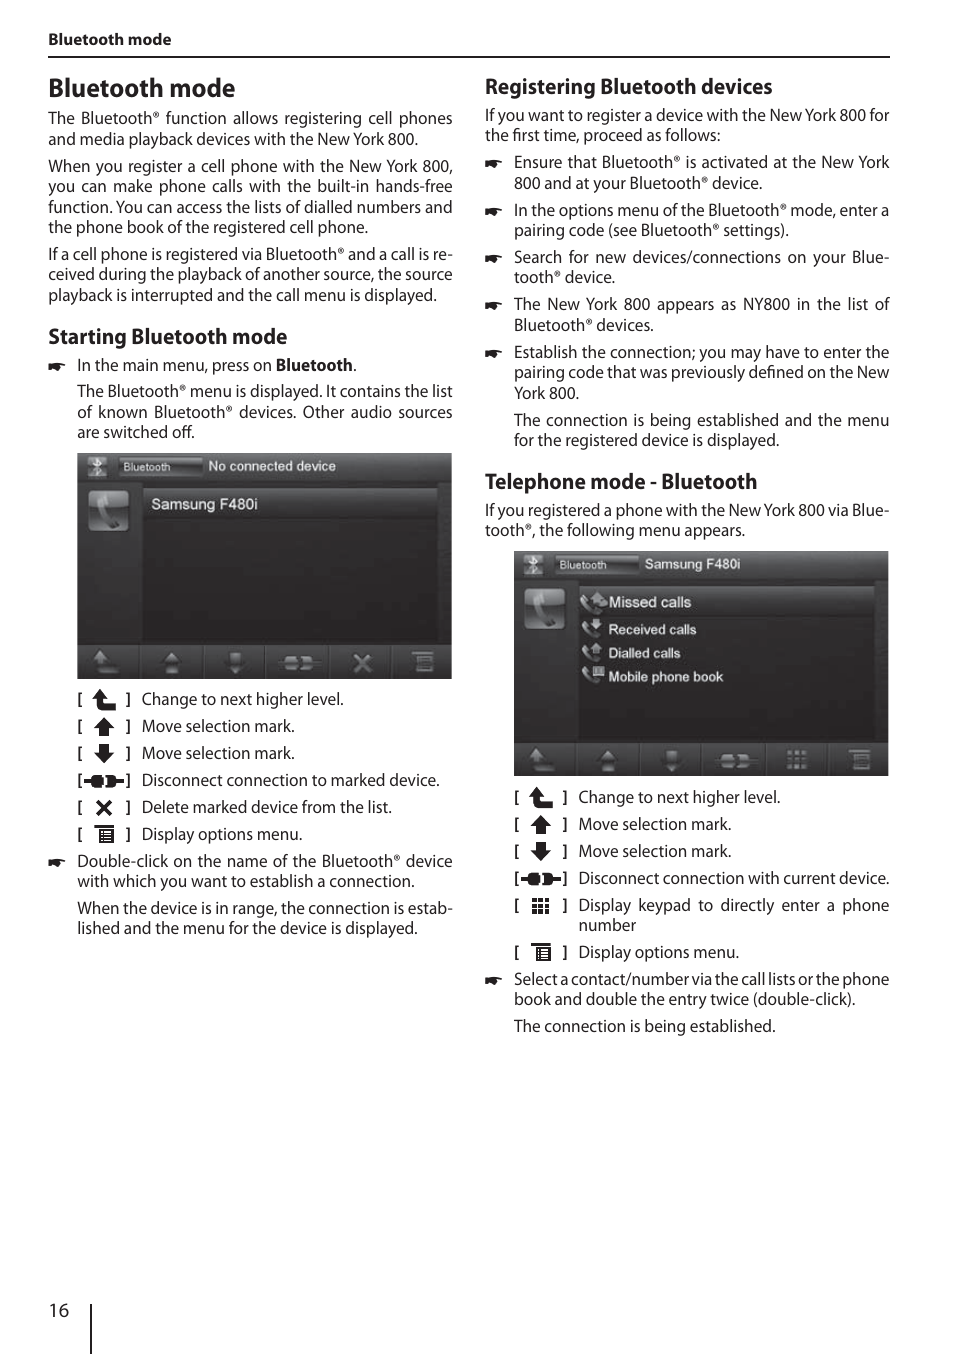 Bluetooth mode, Starting bluetooth mode, Registering bluetooth devices | Blaupunkt  NEW YORK 800 User Manual | Page 16 / 24